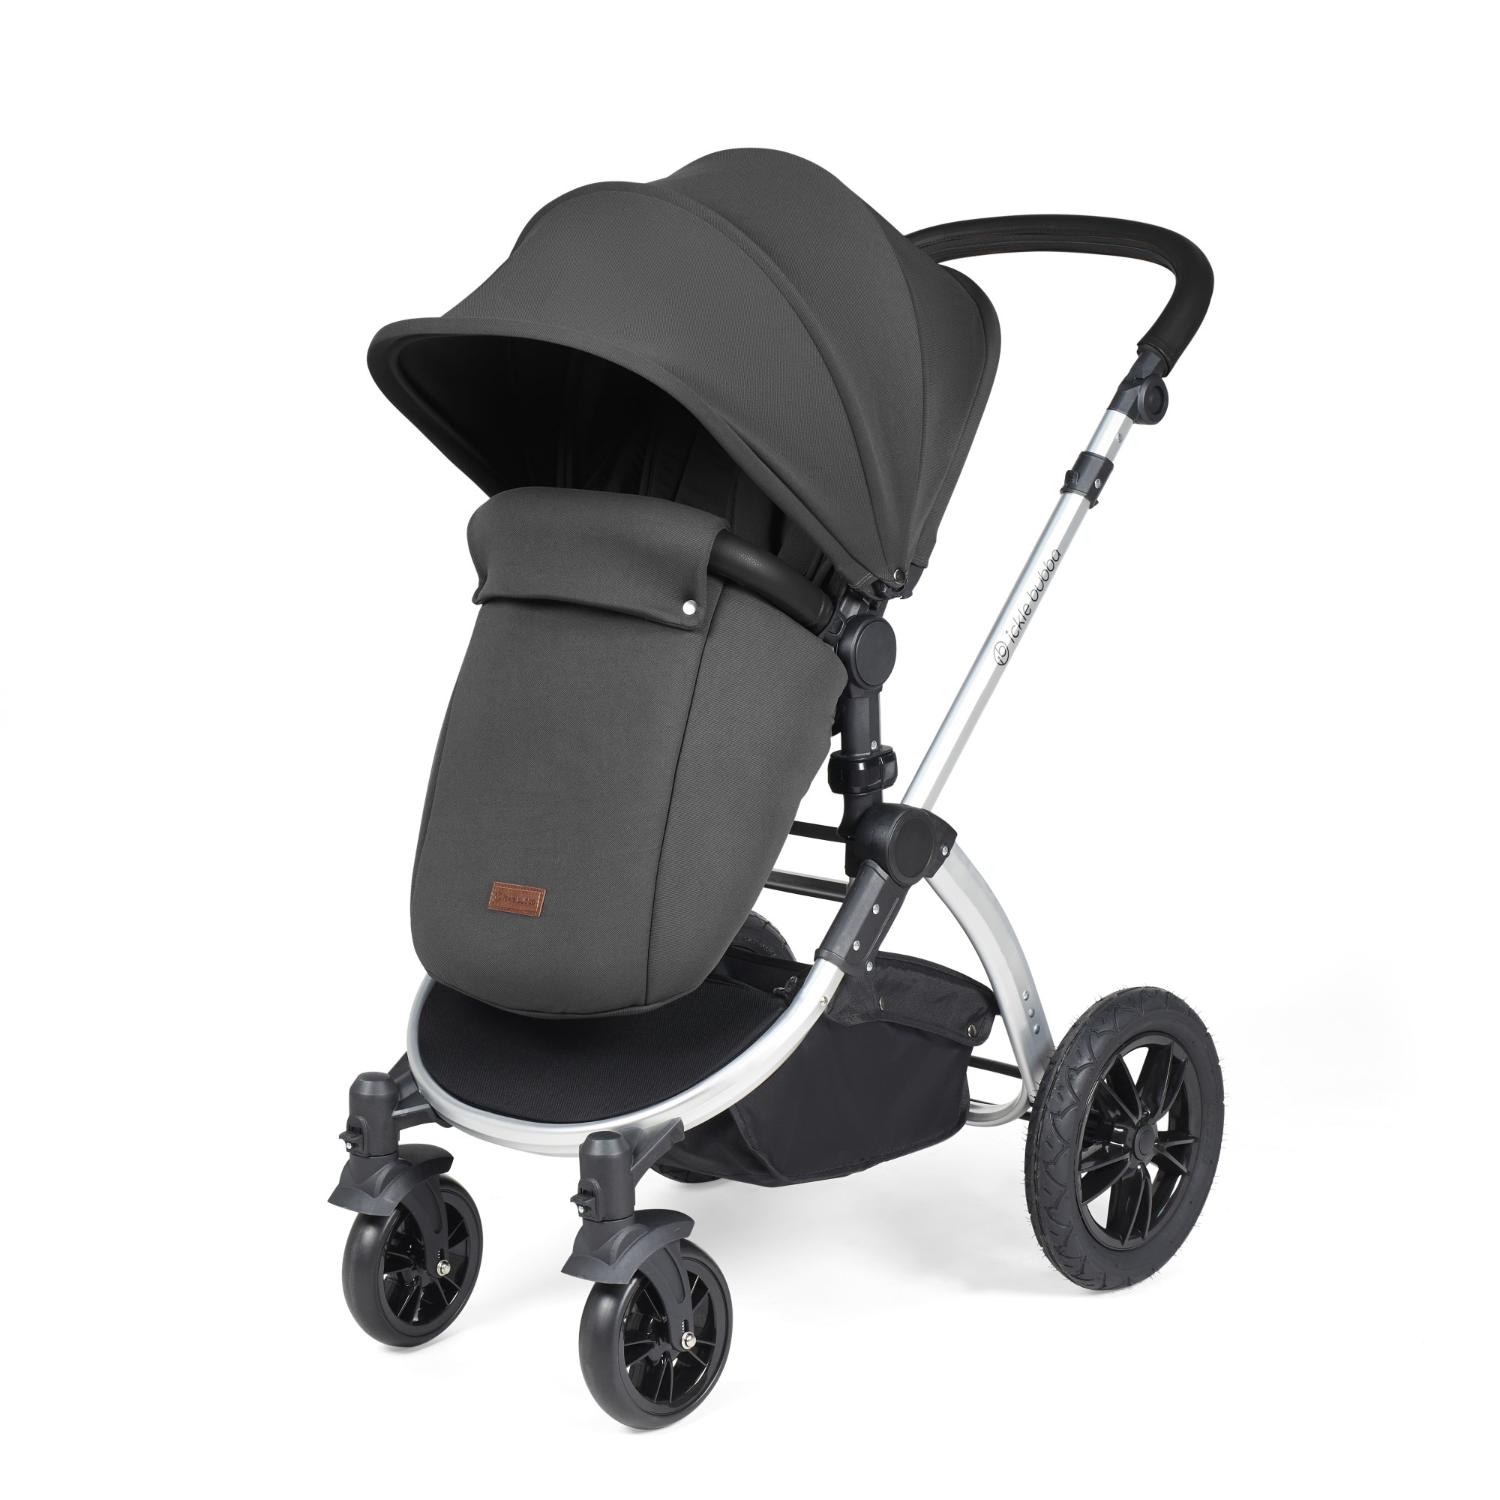 Ickle Bubba Stomp Luxe Pushchair with foot warmer attached in Charcoal Grey colour with silver chassis